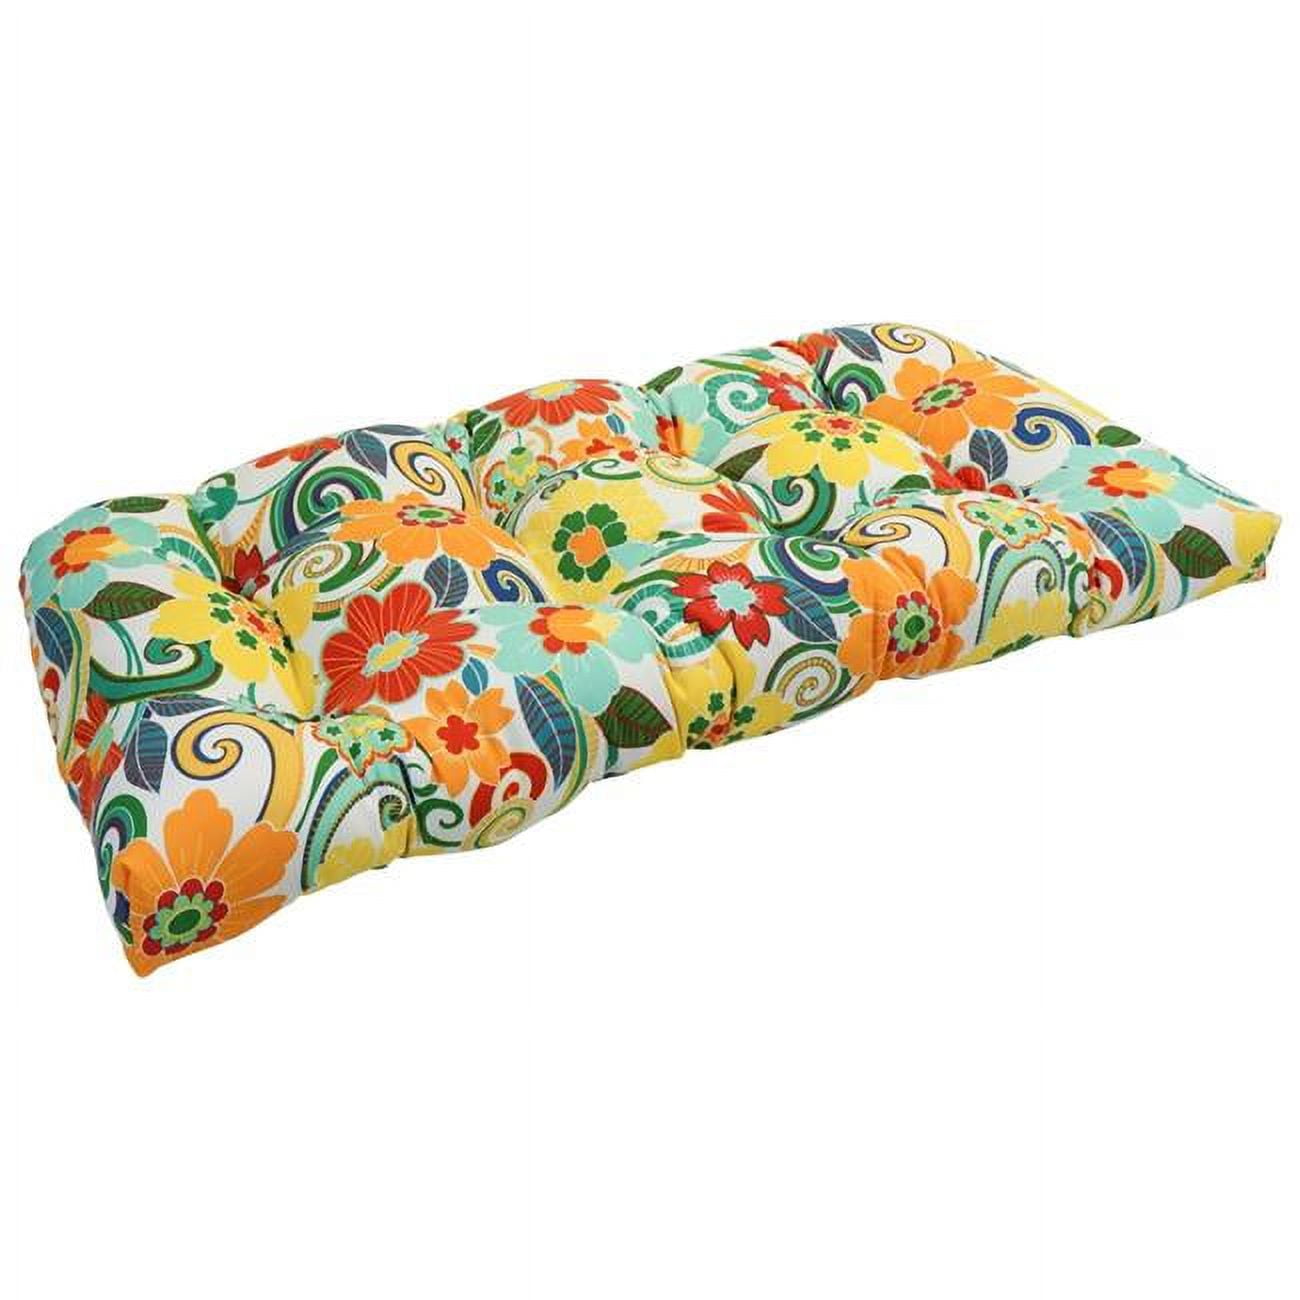 Picture of Blazing Needles 93180-LS-OD-075 42 x 19 in. U-Shaped Patterned Spun Polyester Tufted Settee & Bench Cushion&#44; Floral Spice